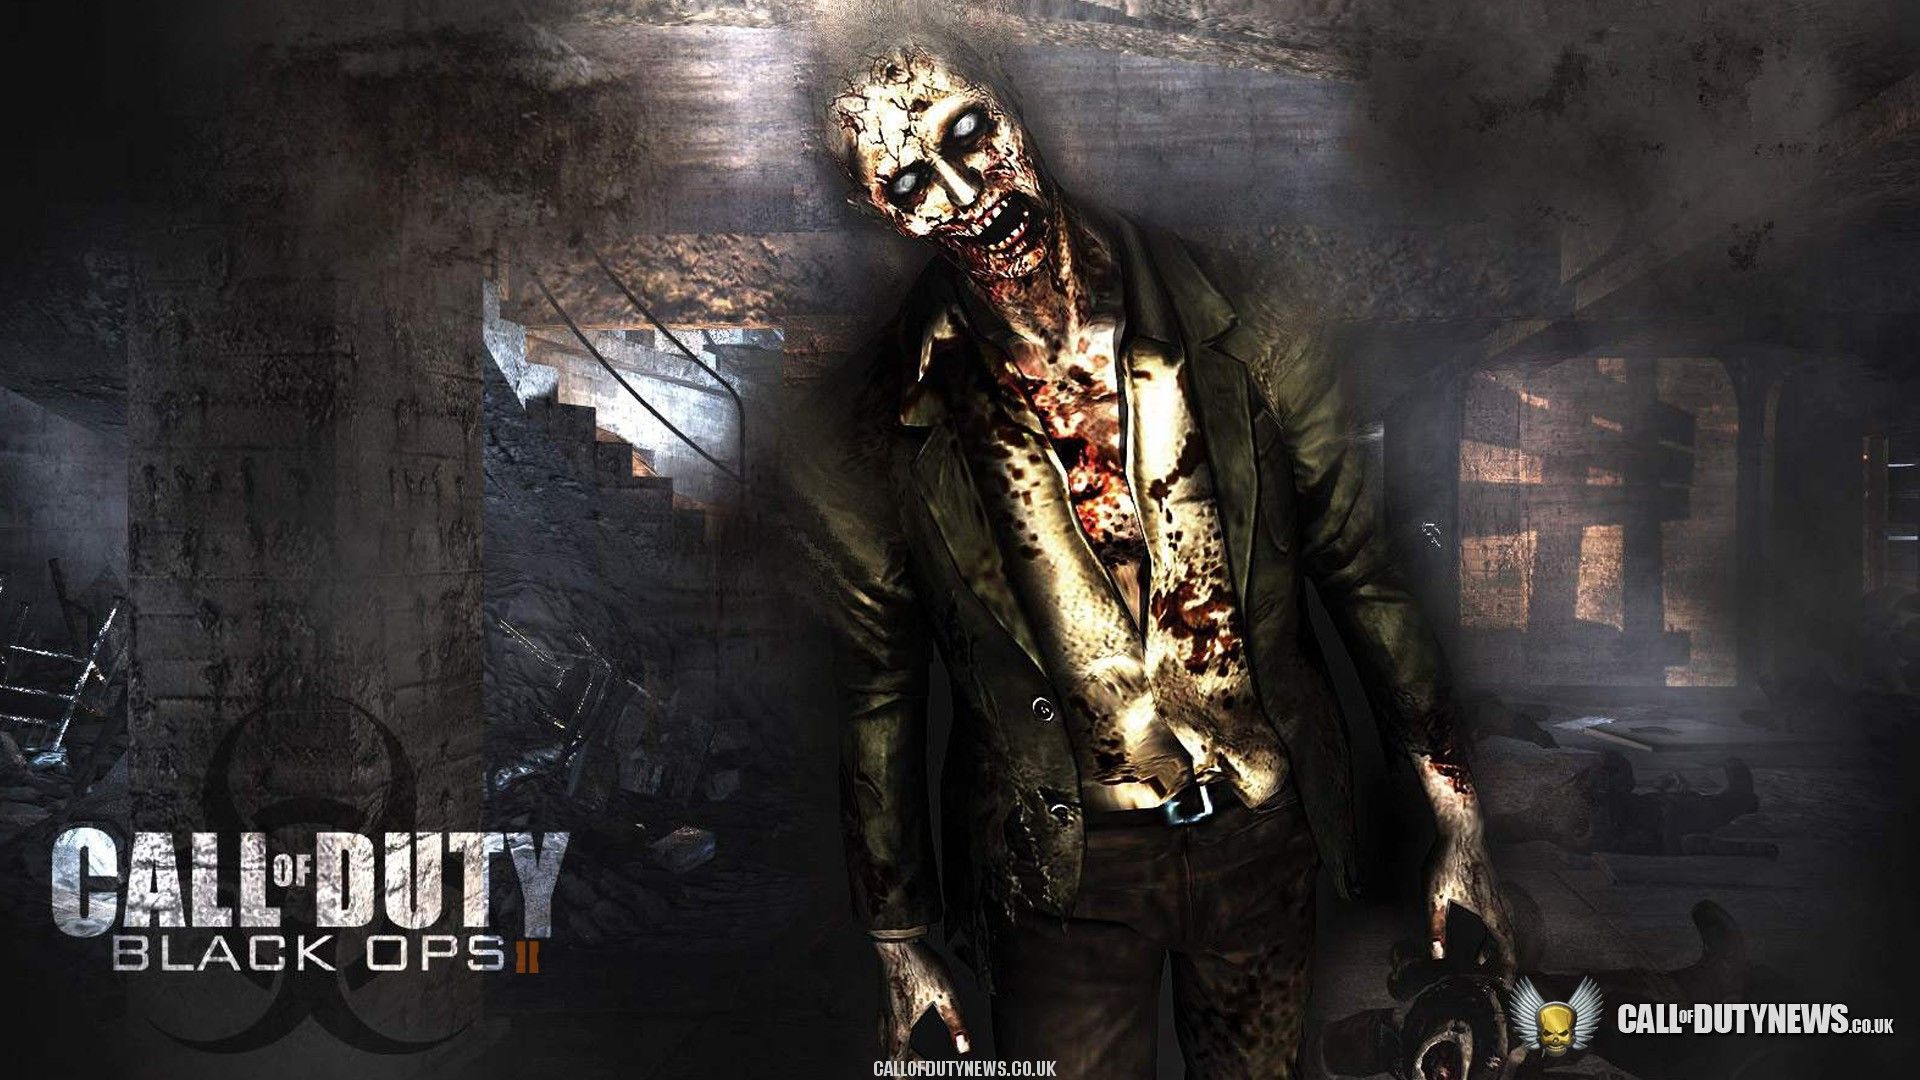 Gallery for - call of duty black ops 2 zombies wallpaper